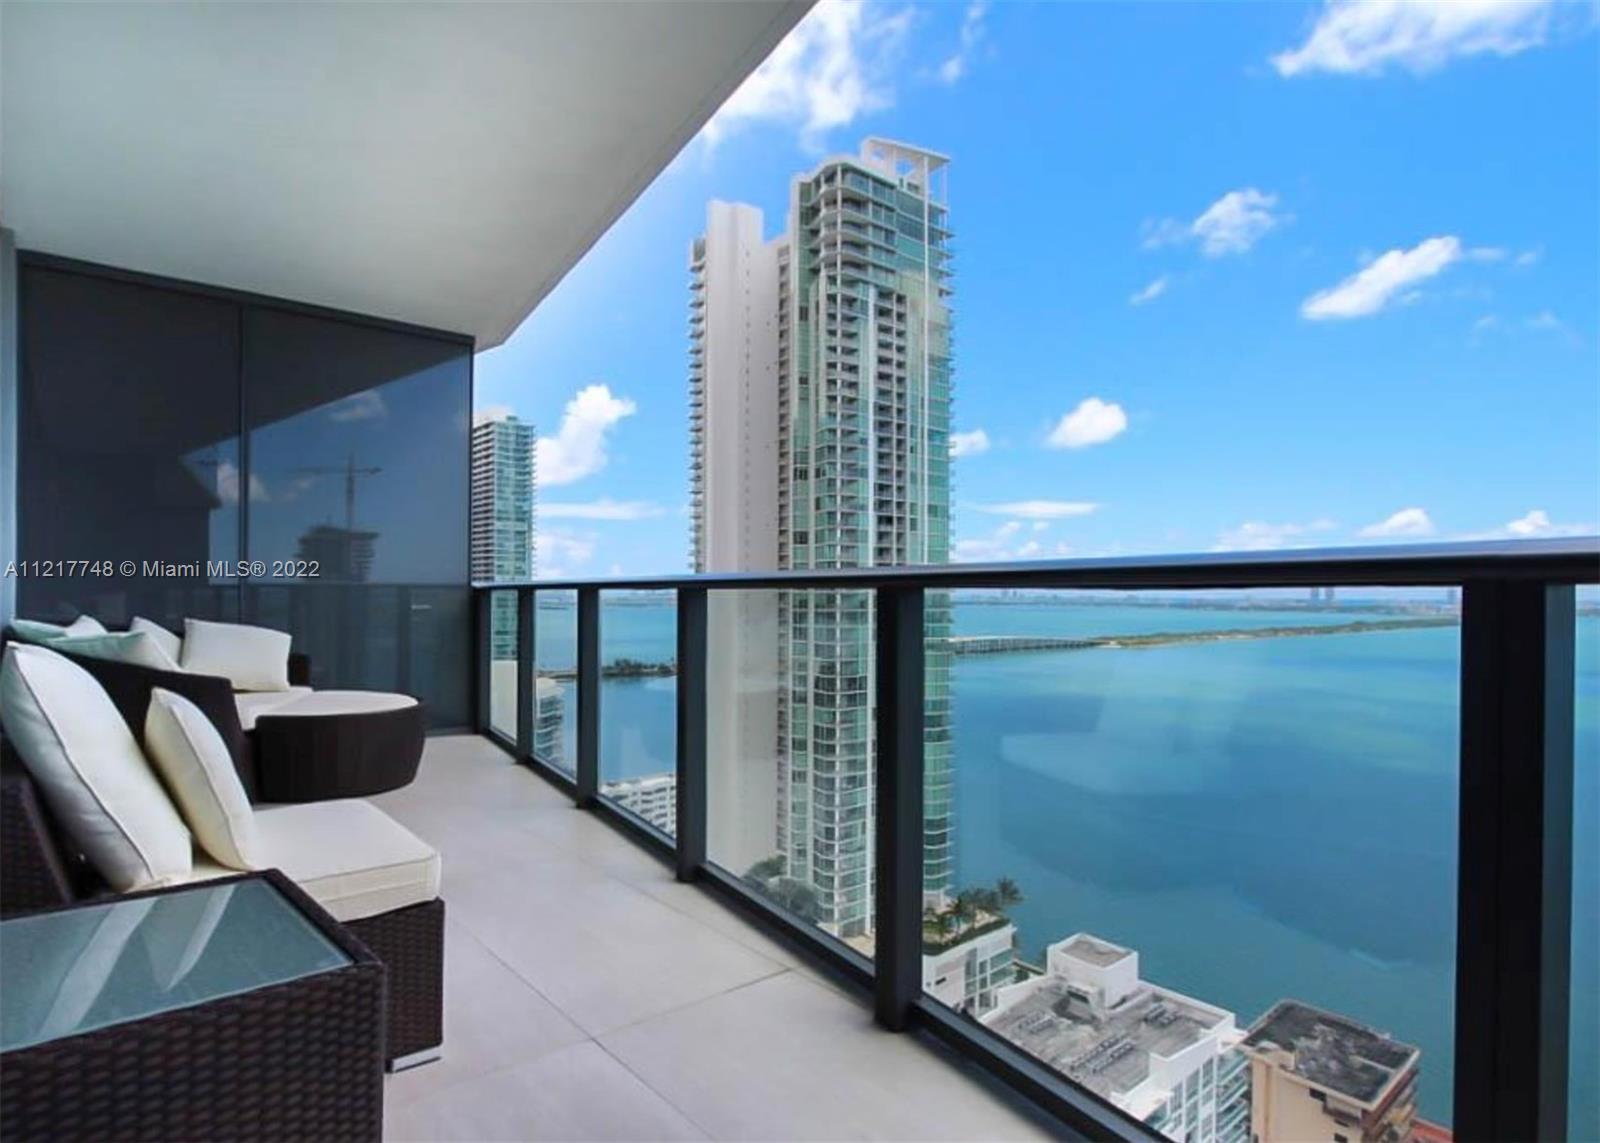 Fully furnished turnkey condo with stunning direct Biscayne Bay views. Private elevator and foyer. T